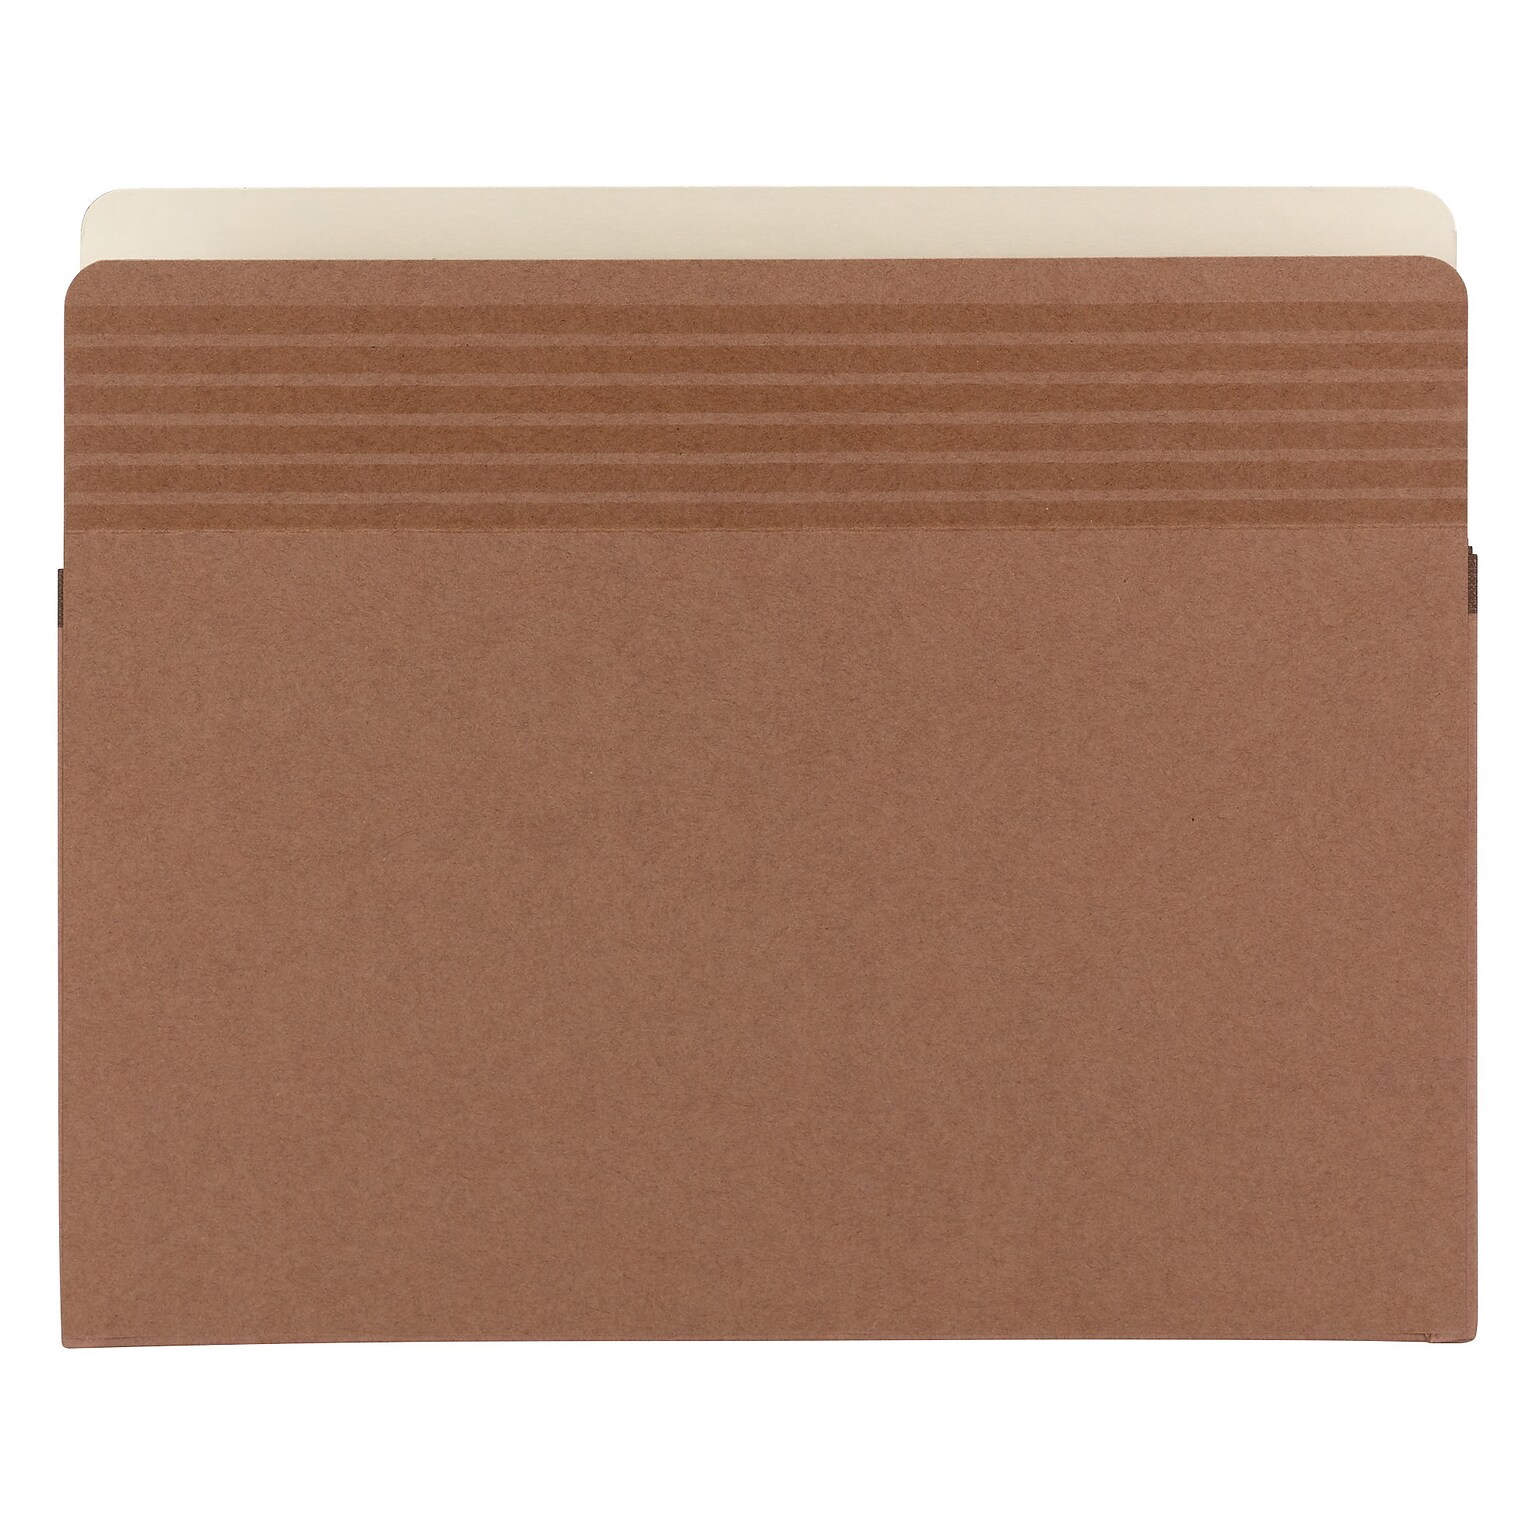 Smead Easy Grip Redrope File Pockets, 3-1/2 Expansion, Letter Size, Brown, 25/Box (73208)